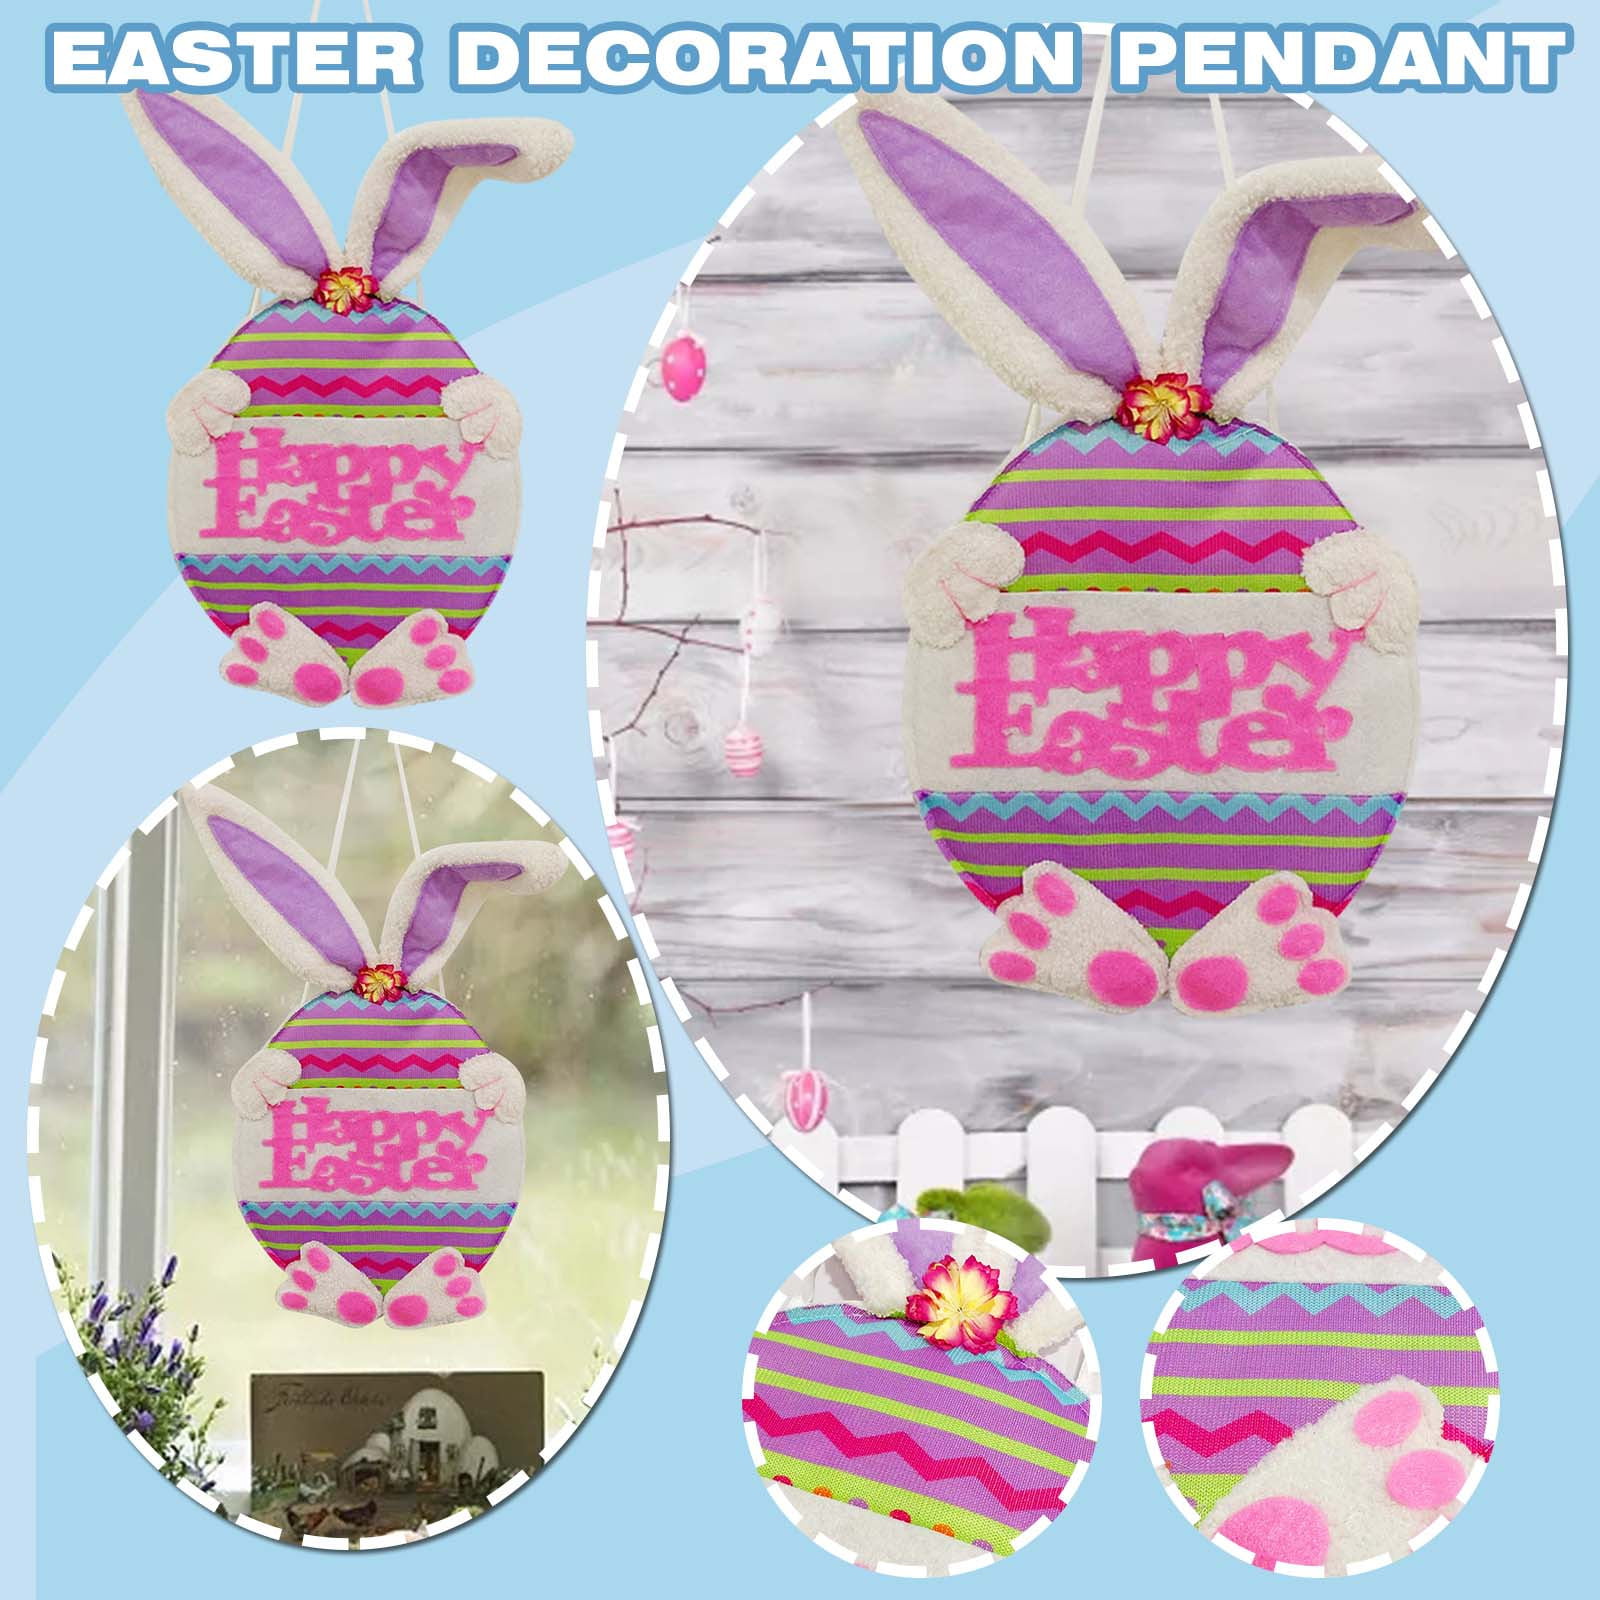 Details about   NEW Happy Easter Egg Shimmer Lighted Window Silhouette Decoration 15.5" X 11" 